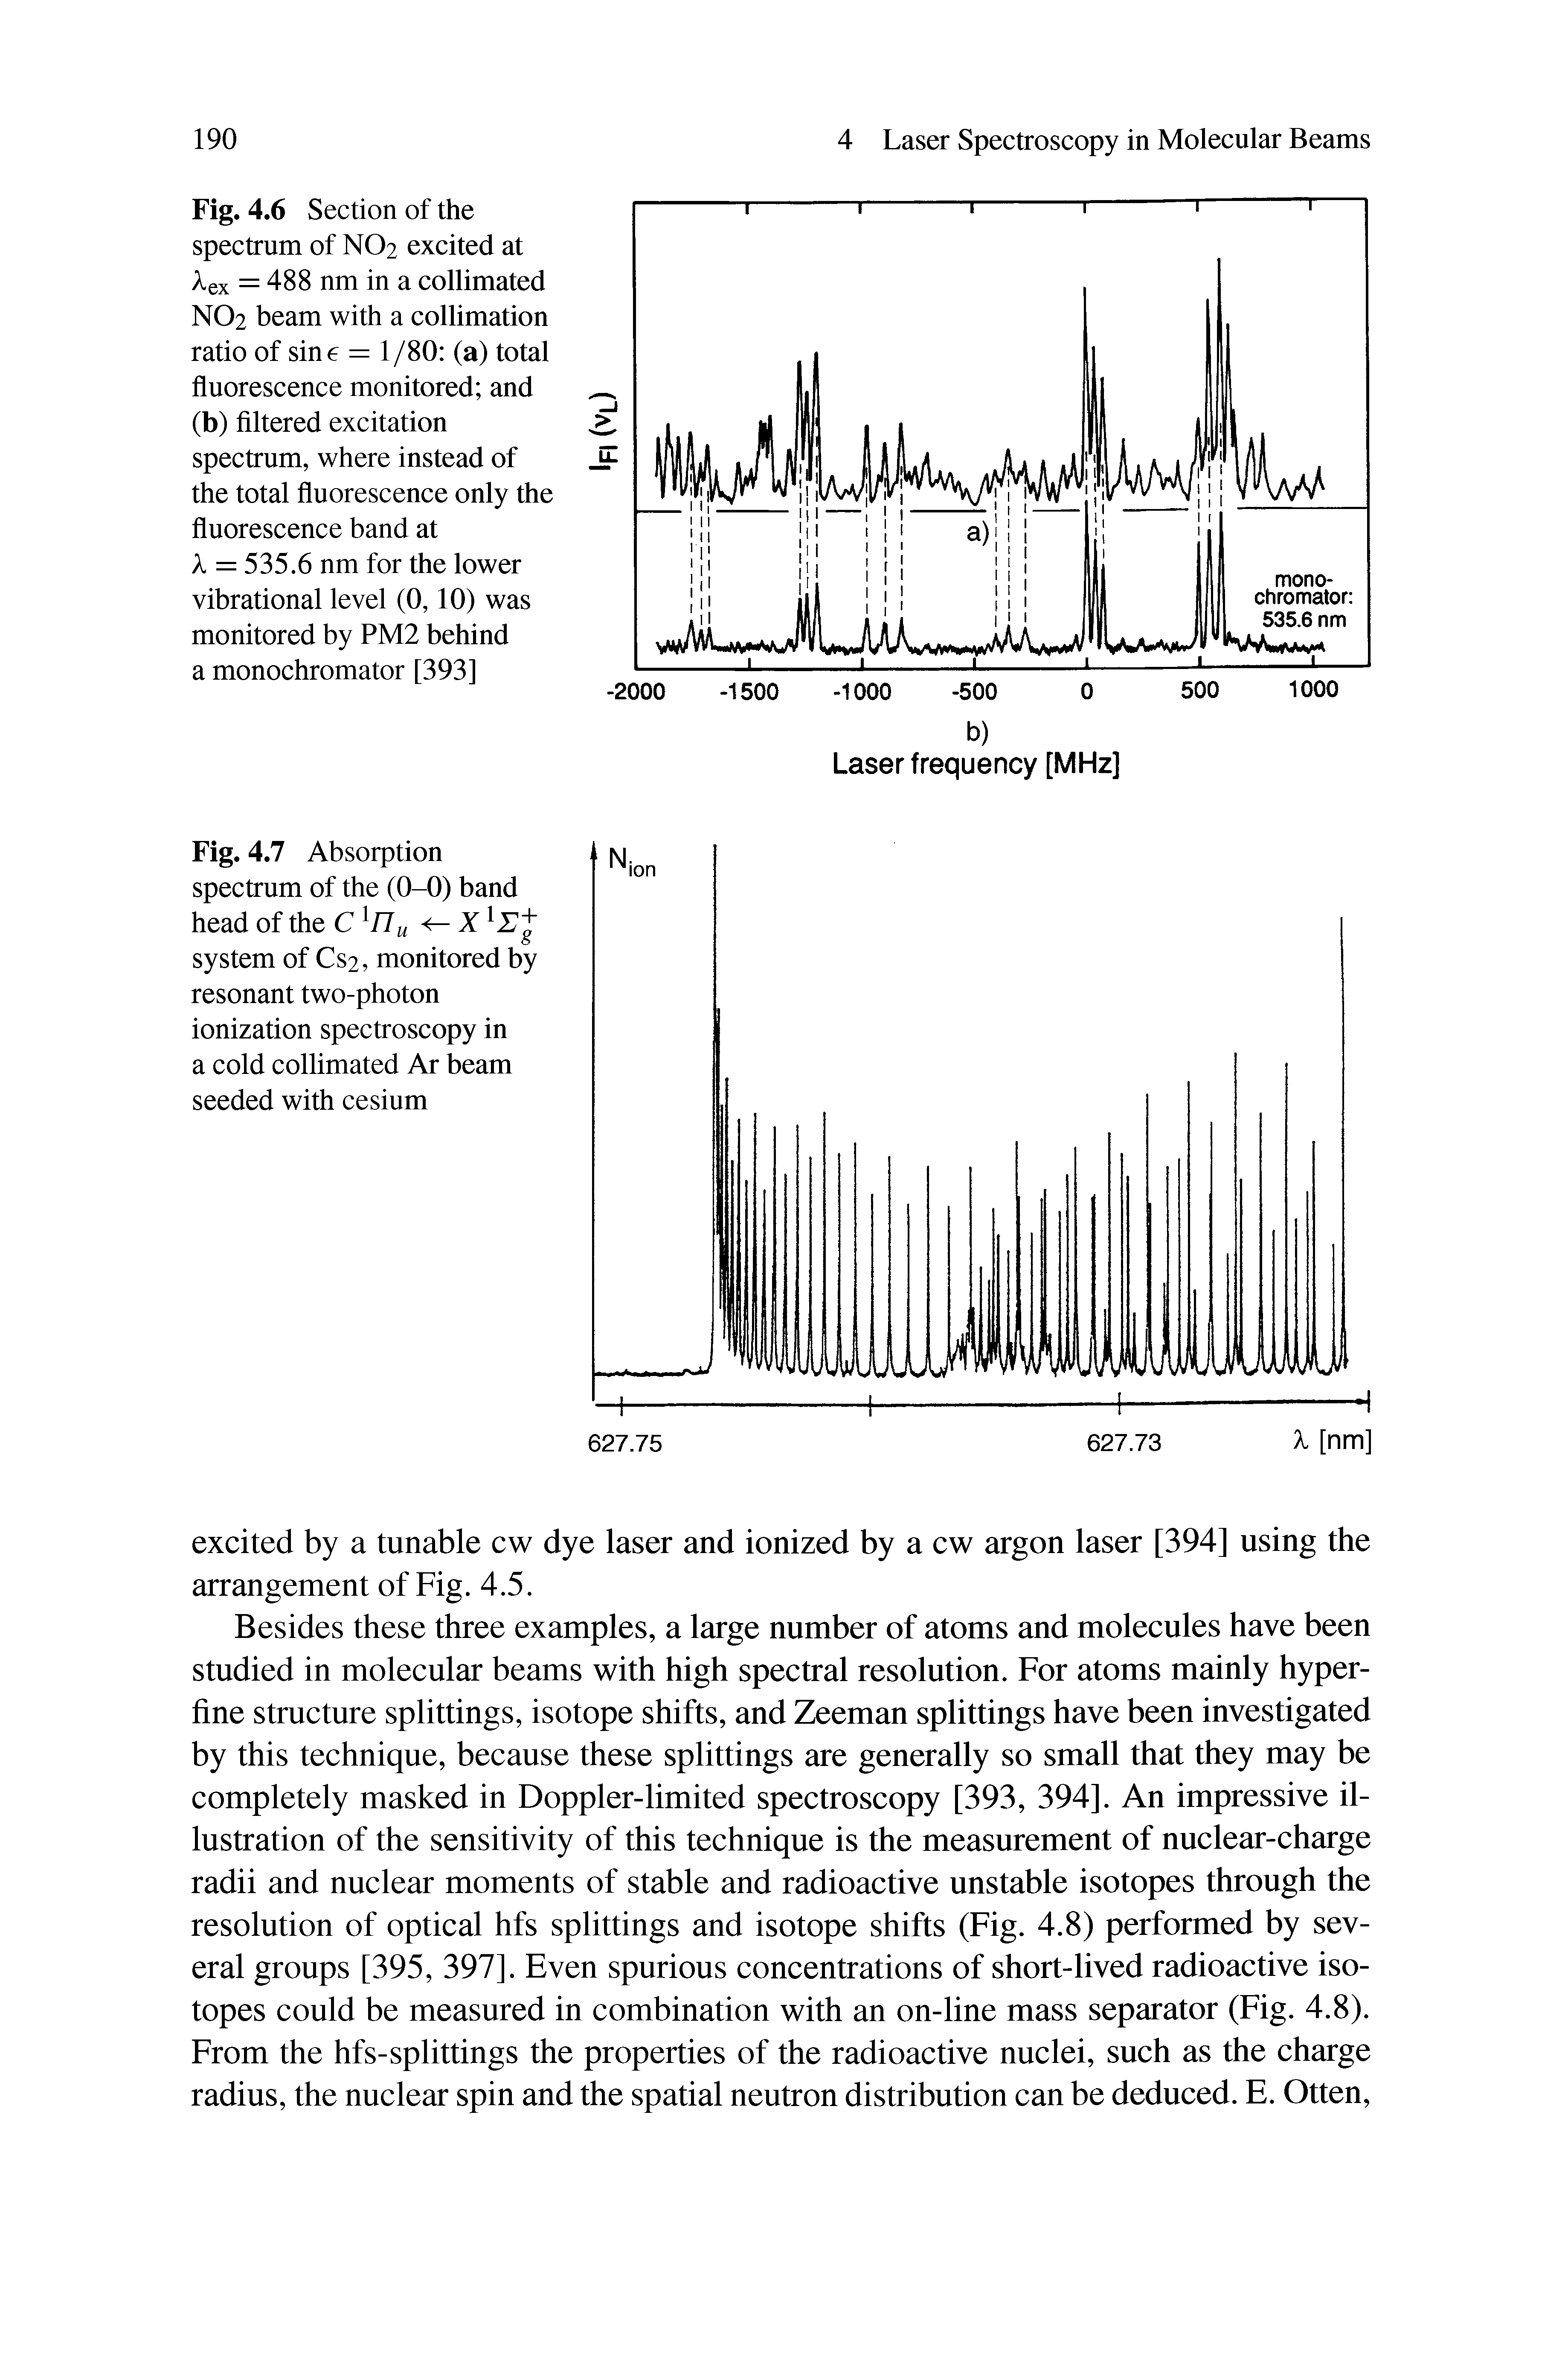 Fig. 4.6 Section of the spectrum of NO2 excited at Aex = 488 nm in a collimated NO2 beam with a collimation ratio of sine = 1/80 (a) total fluorescence monitored and (b) filtered excitation spectrum, where instead of the total fluorescence only the fluorescence band at X = 535.6 nm for the lower vibrational level (0,10) was monitored by PM2 behind a monochromator [393]...